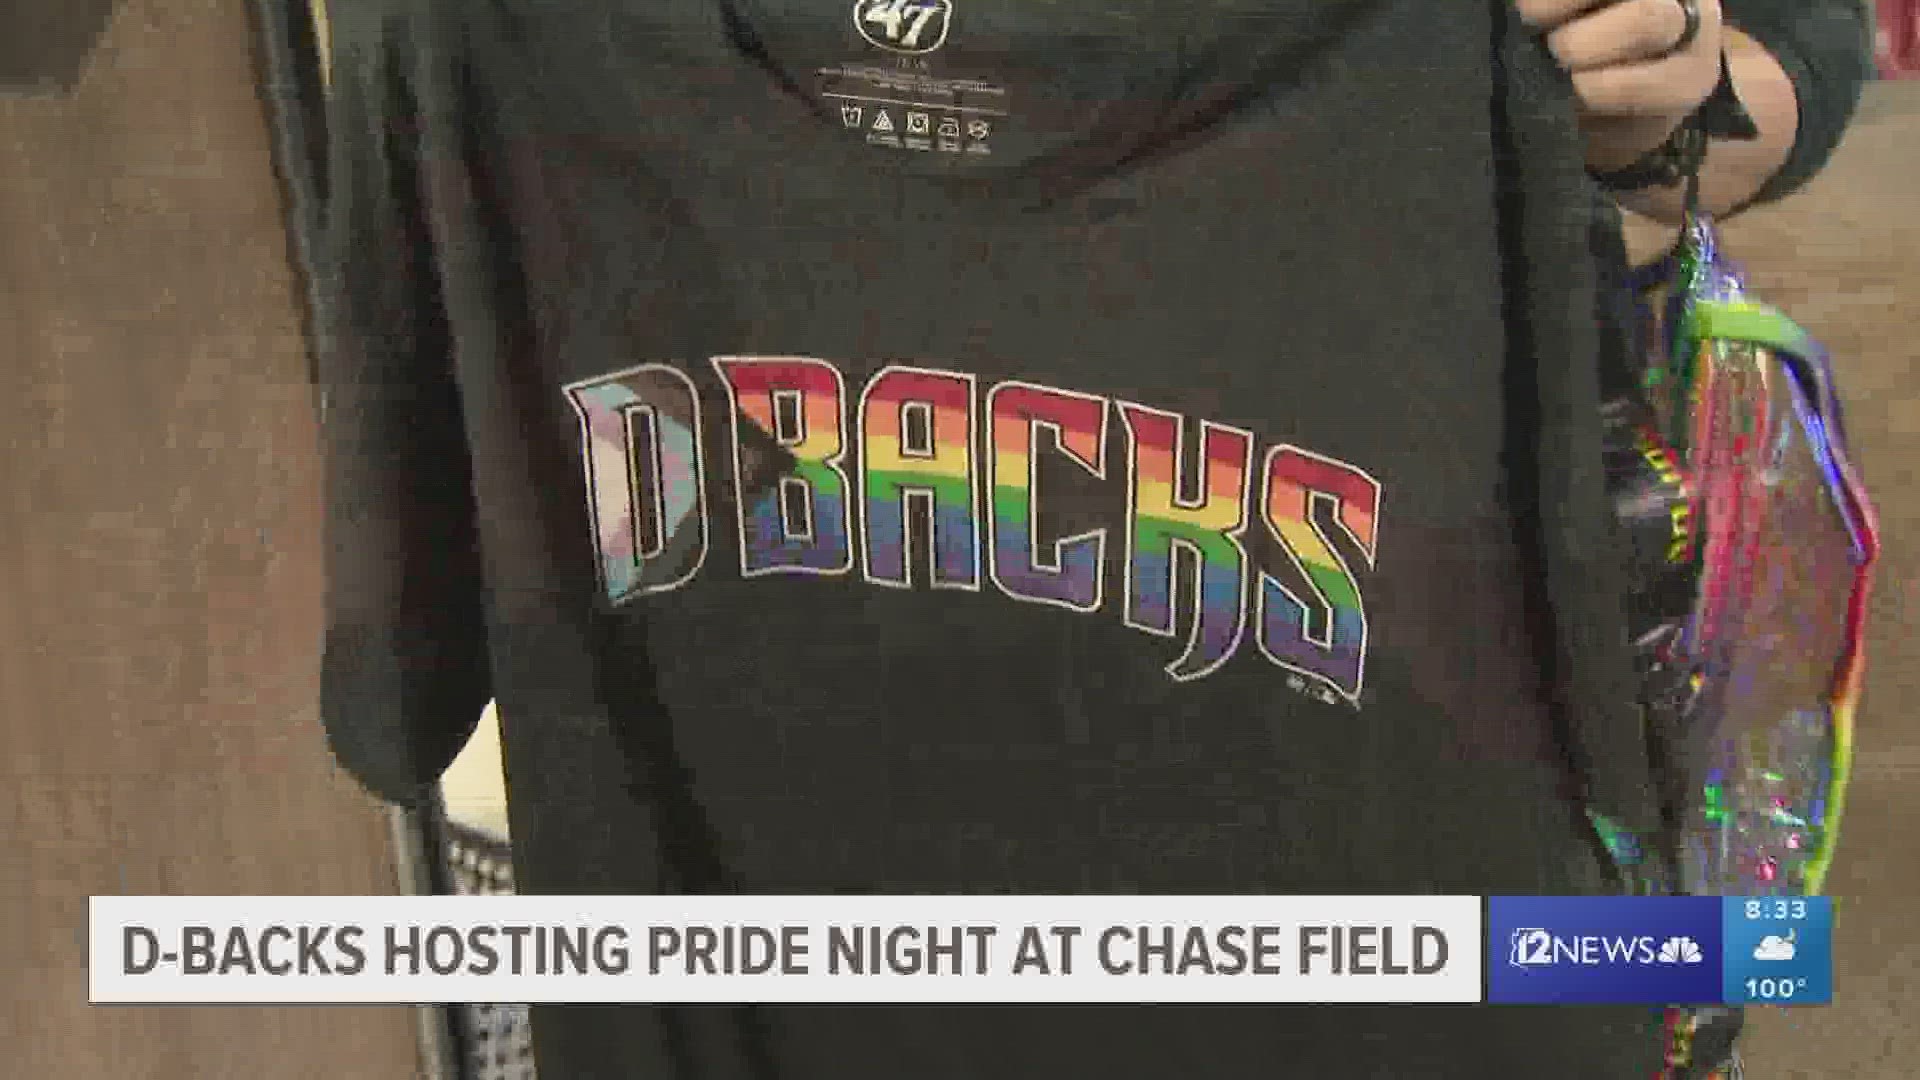 D-backs to celebrate Juneteenth, Pride Night and Father's Day